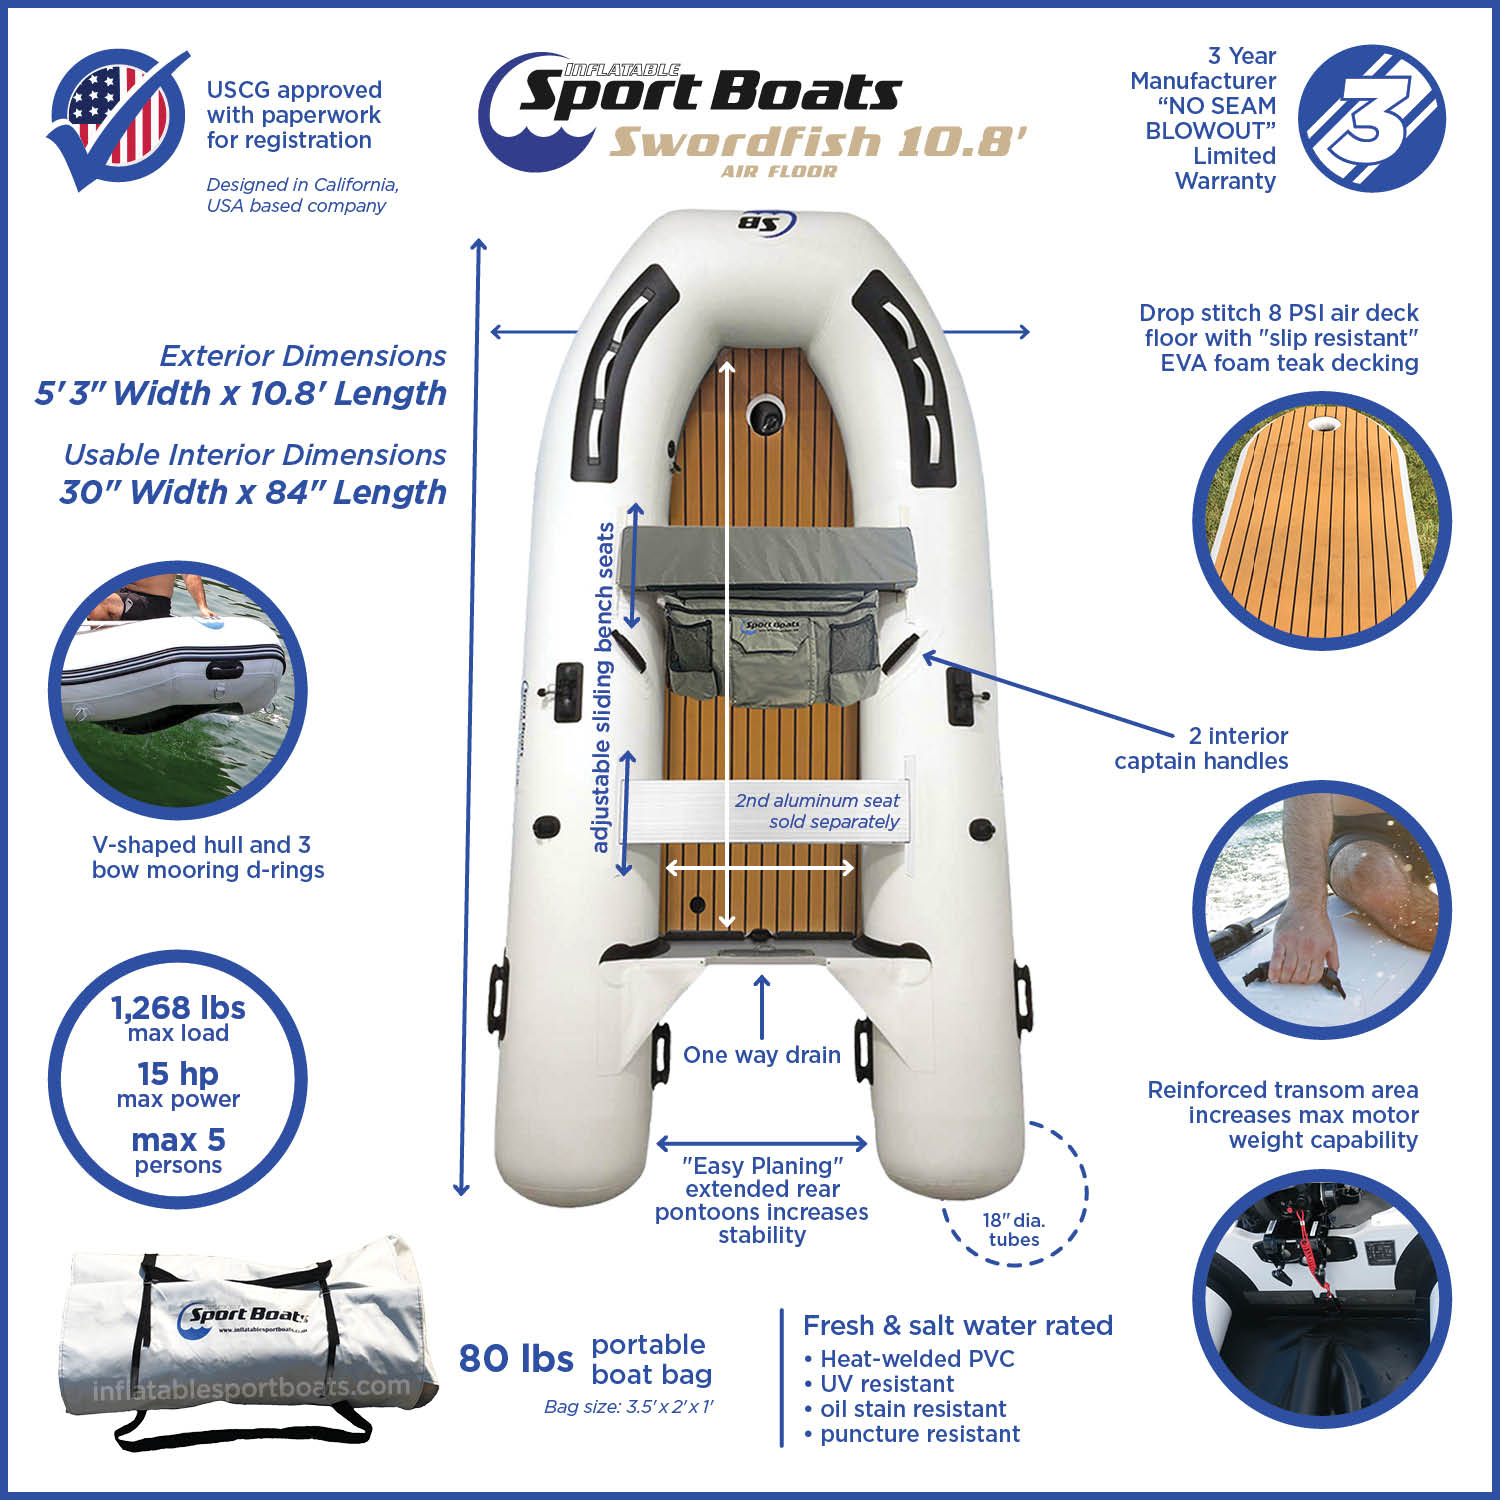 Sport Boats Swordfish 10.8 dinghy boat features